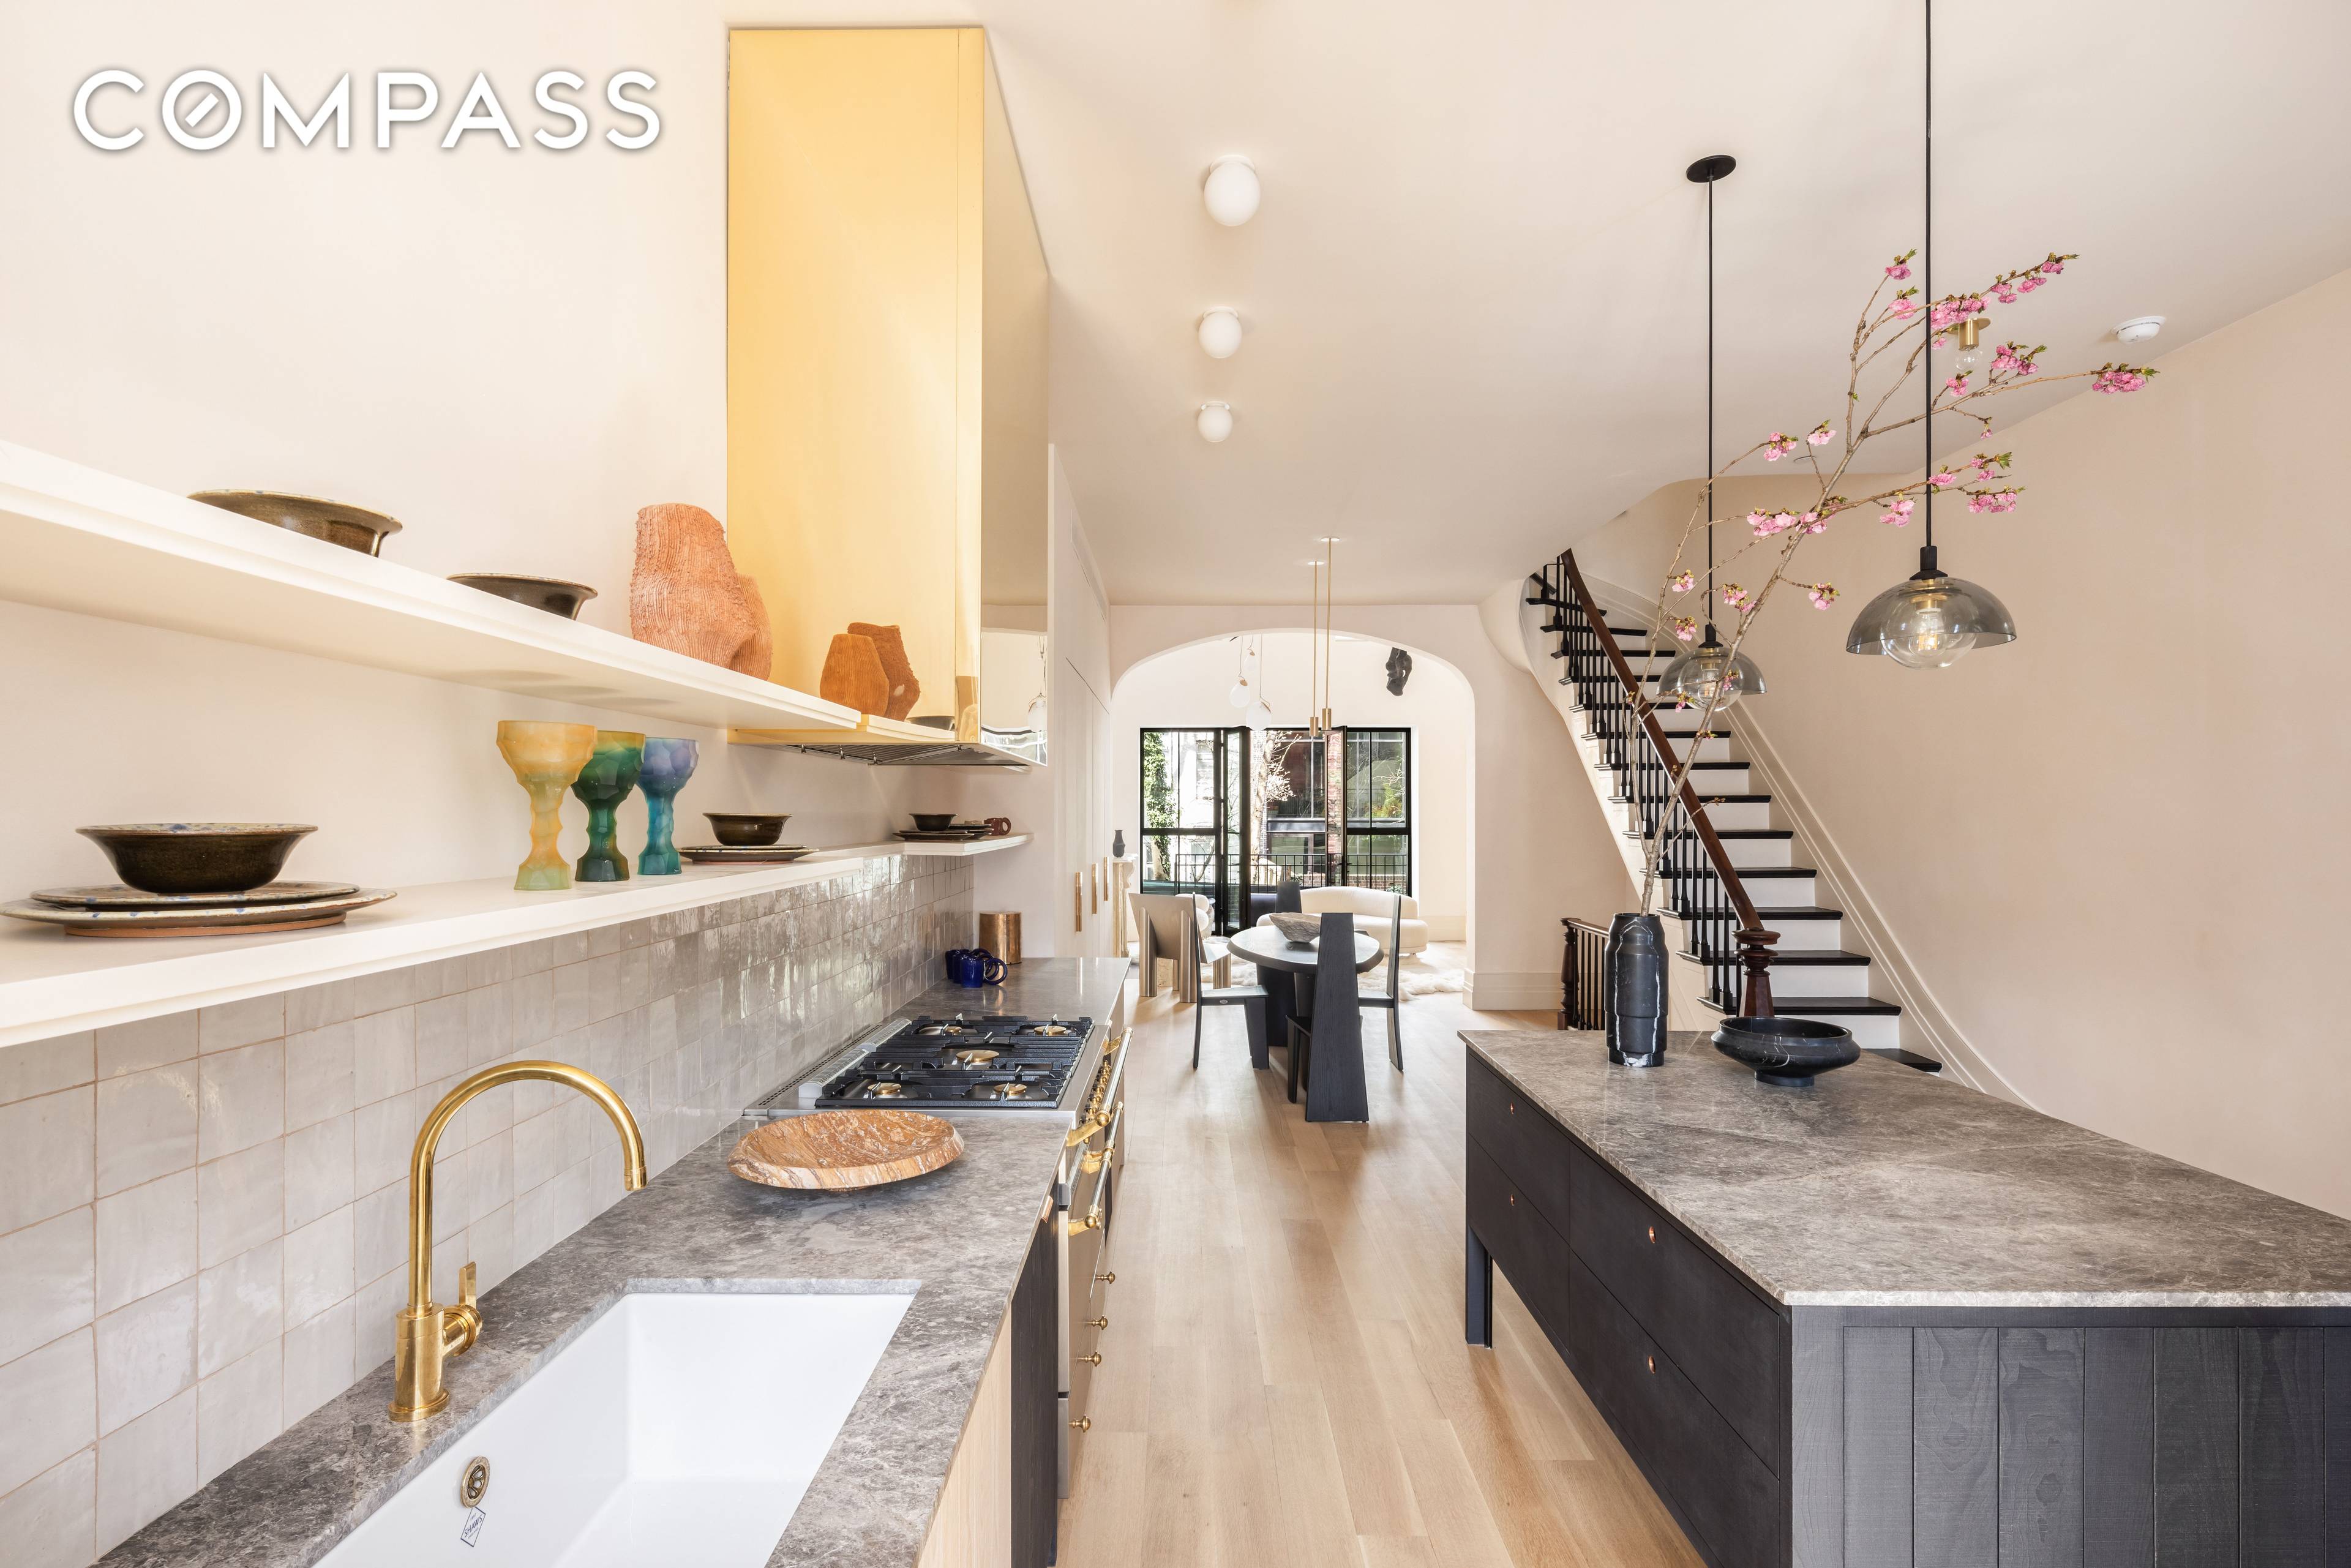 DESCRIPTIONLocated on the most sought after block in Chelsea and steps from the Highline lies a five story treasure.